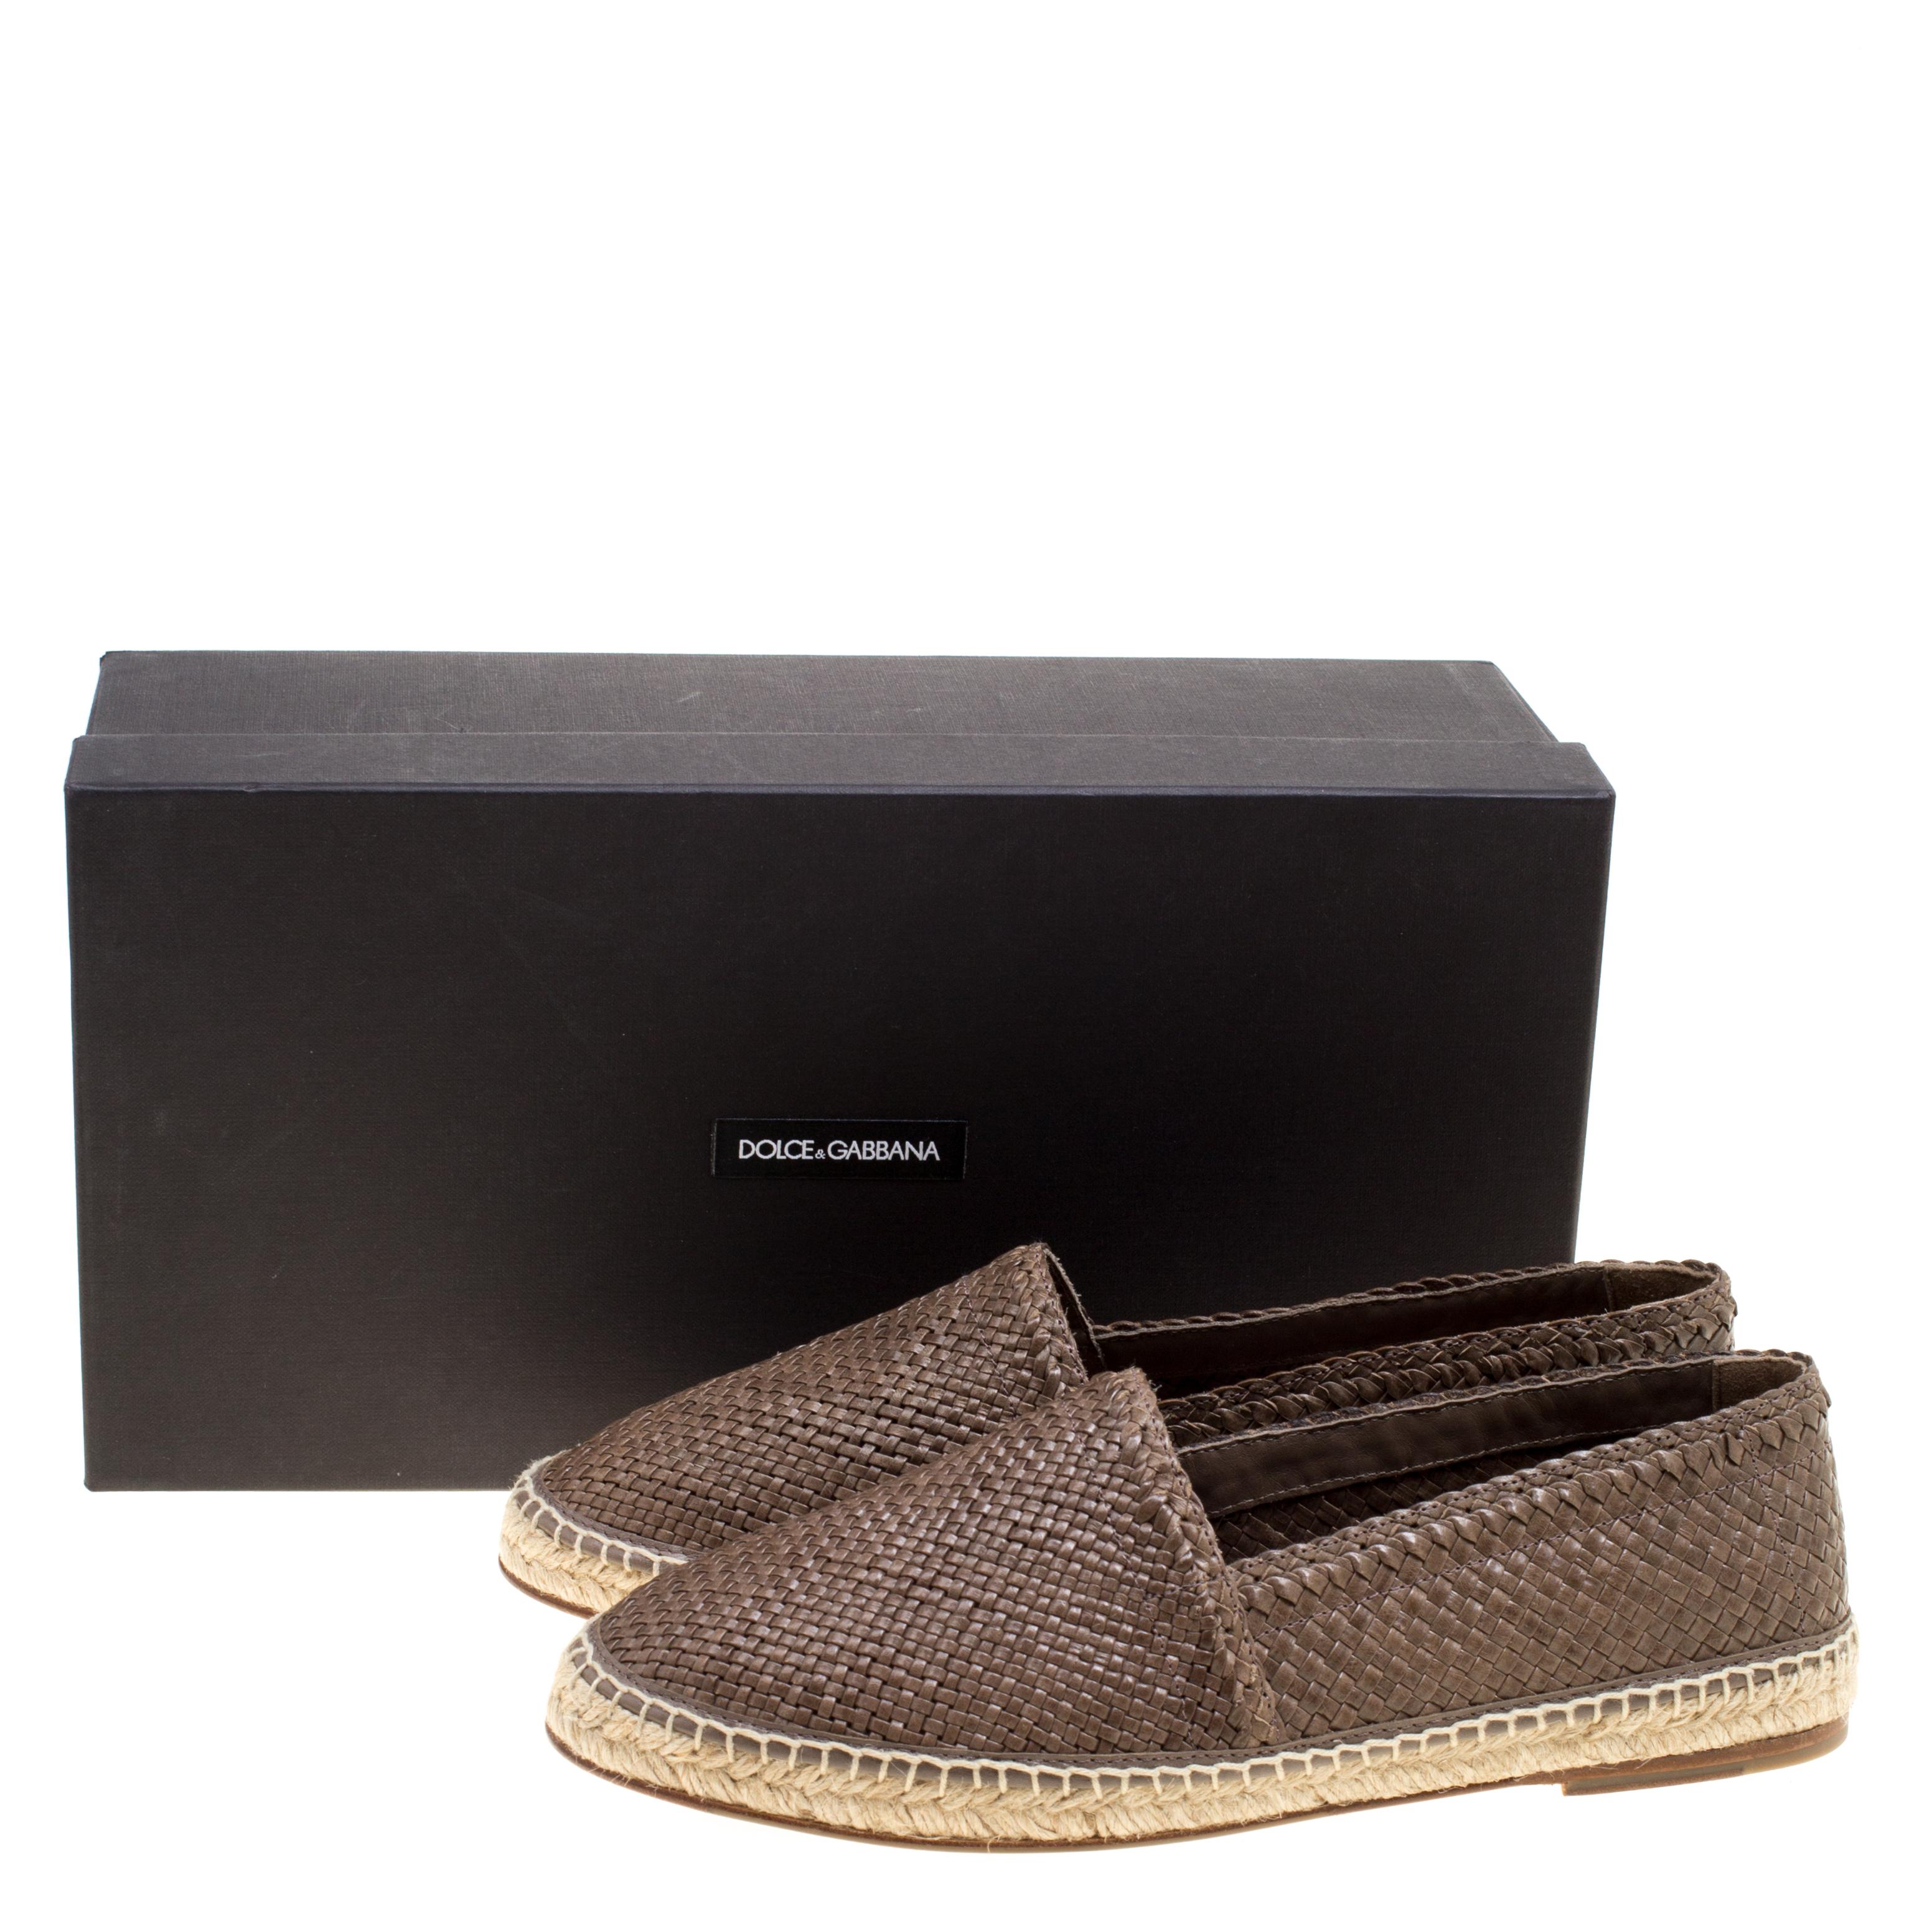 Dolce and Gabbana Brown Braided Leather Espadrilles Size 42 4